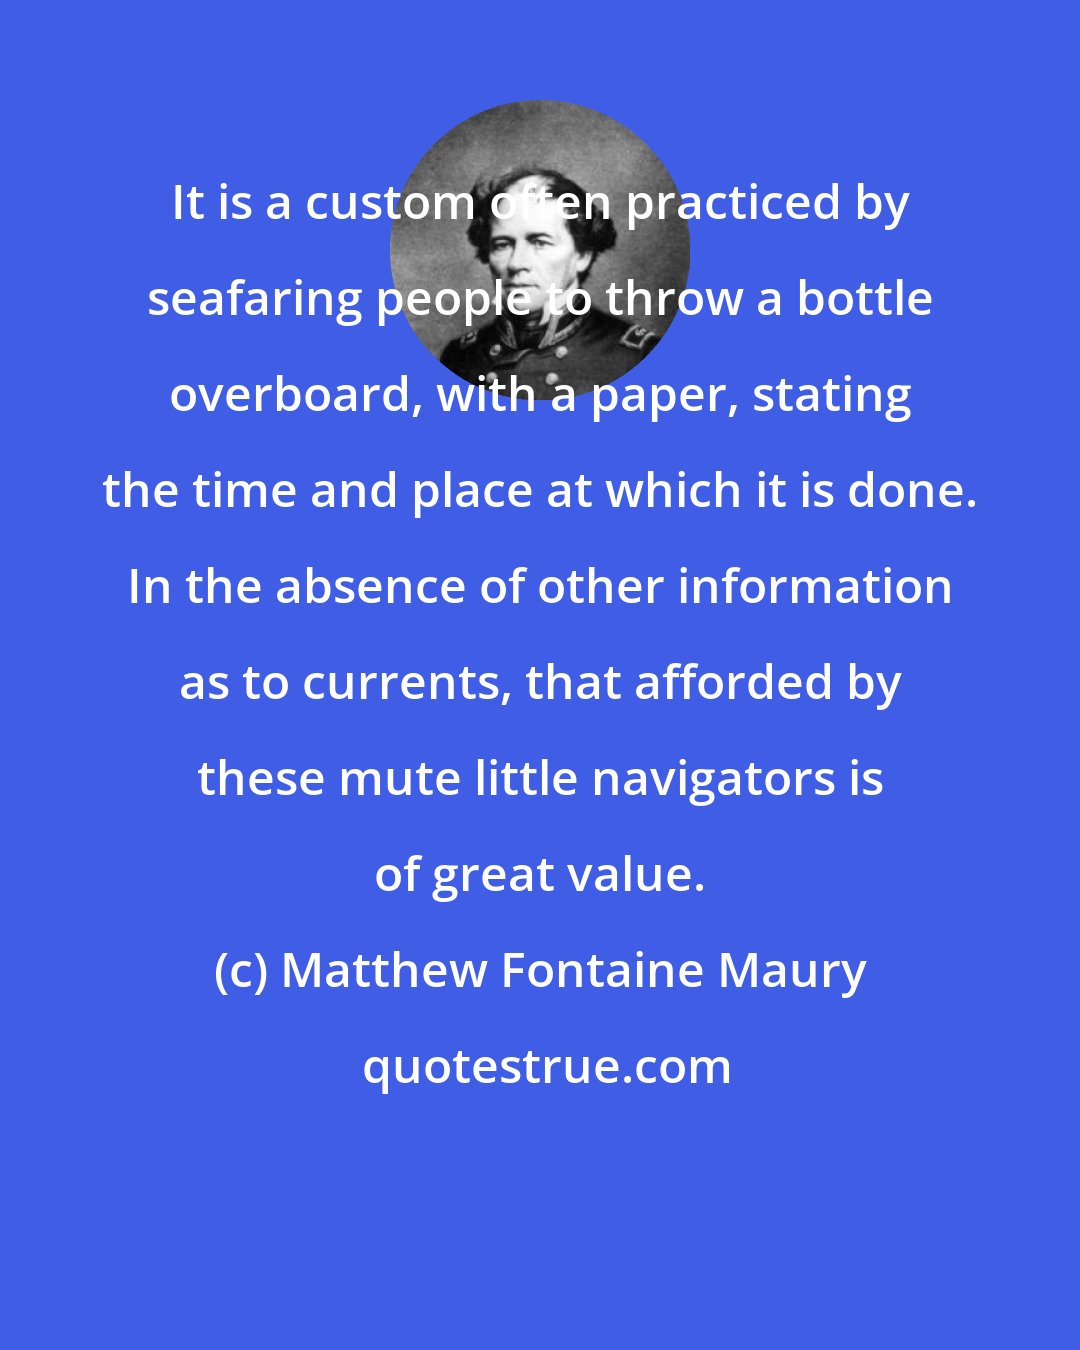 Matthew Fontaine Maury: It is a custom often practiced by seafaring people to throw a bottle overboard, with a paper, stating the time and place at which it is done. In the absence of other information as to currents, that afforded by these mute little navigators is of great value.